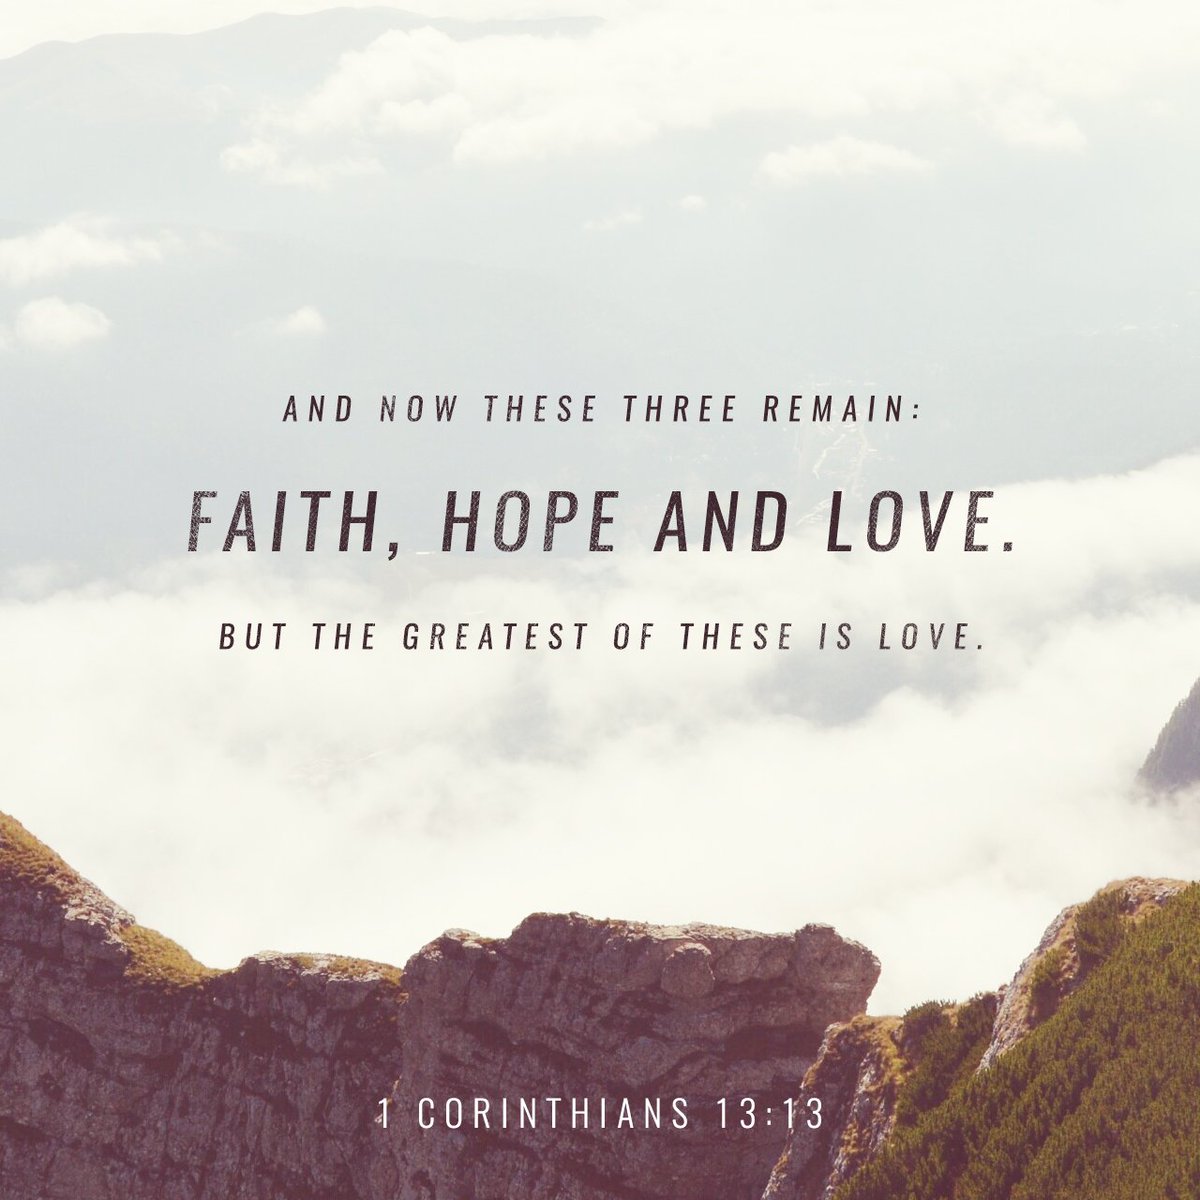 Daily Bible Verse on Twitter "And now these three remain faith hope and love But the greatest of these is love